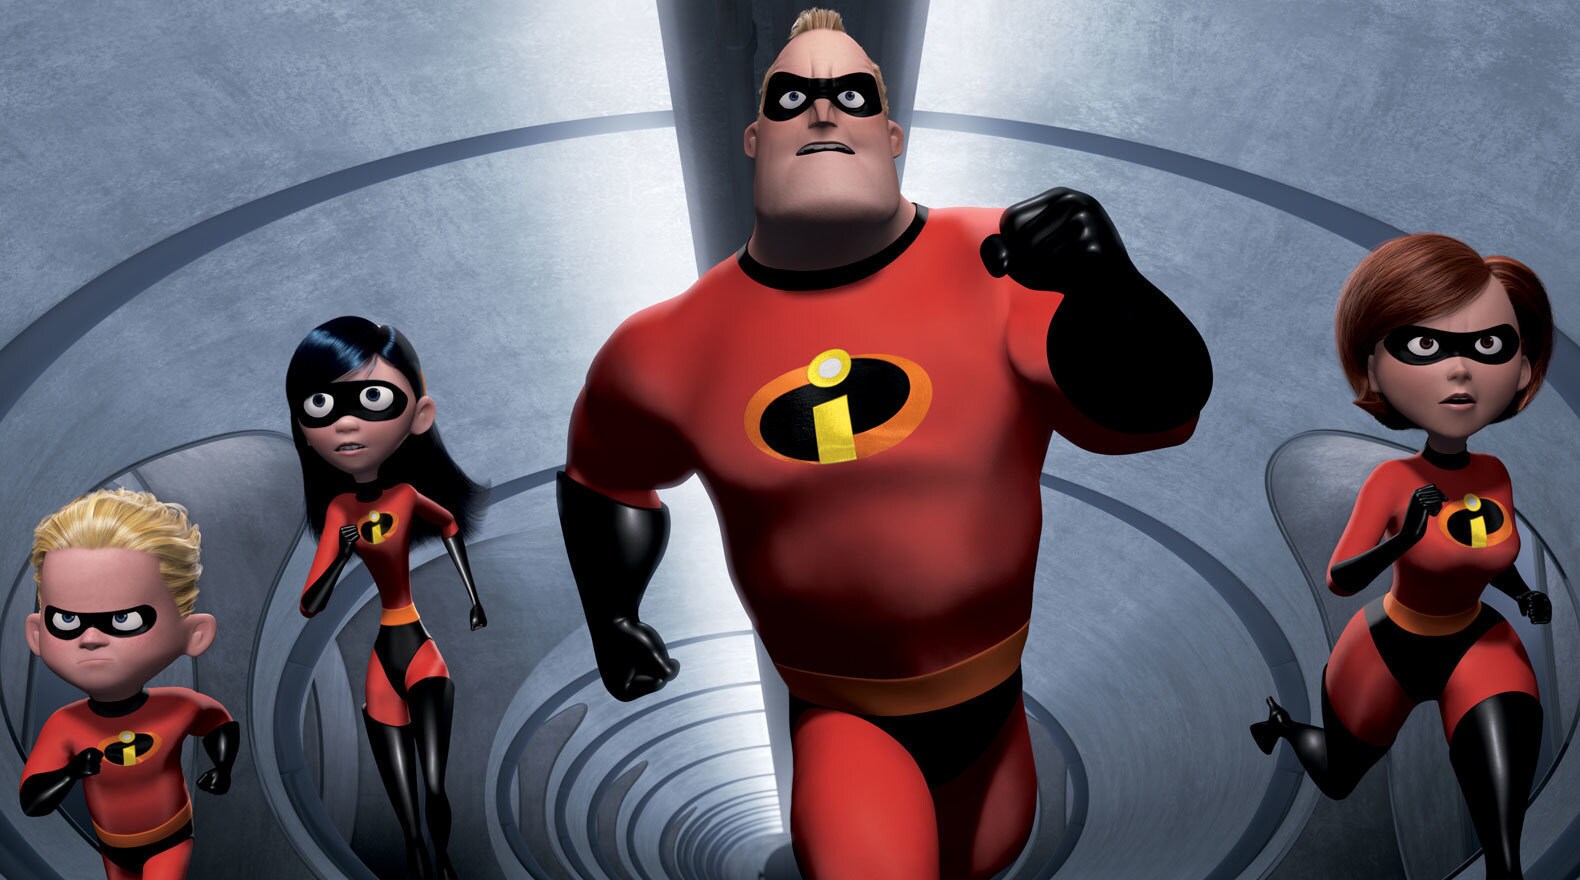 The Incredibles on their way to confront Syndrome and the Omnidroid in "The Incredibles"